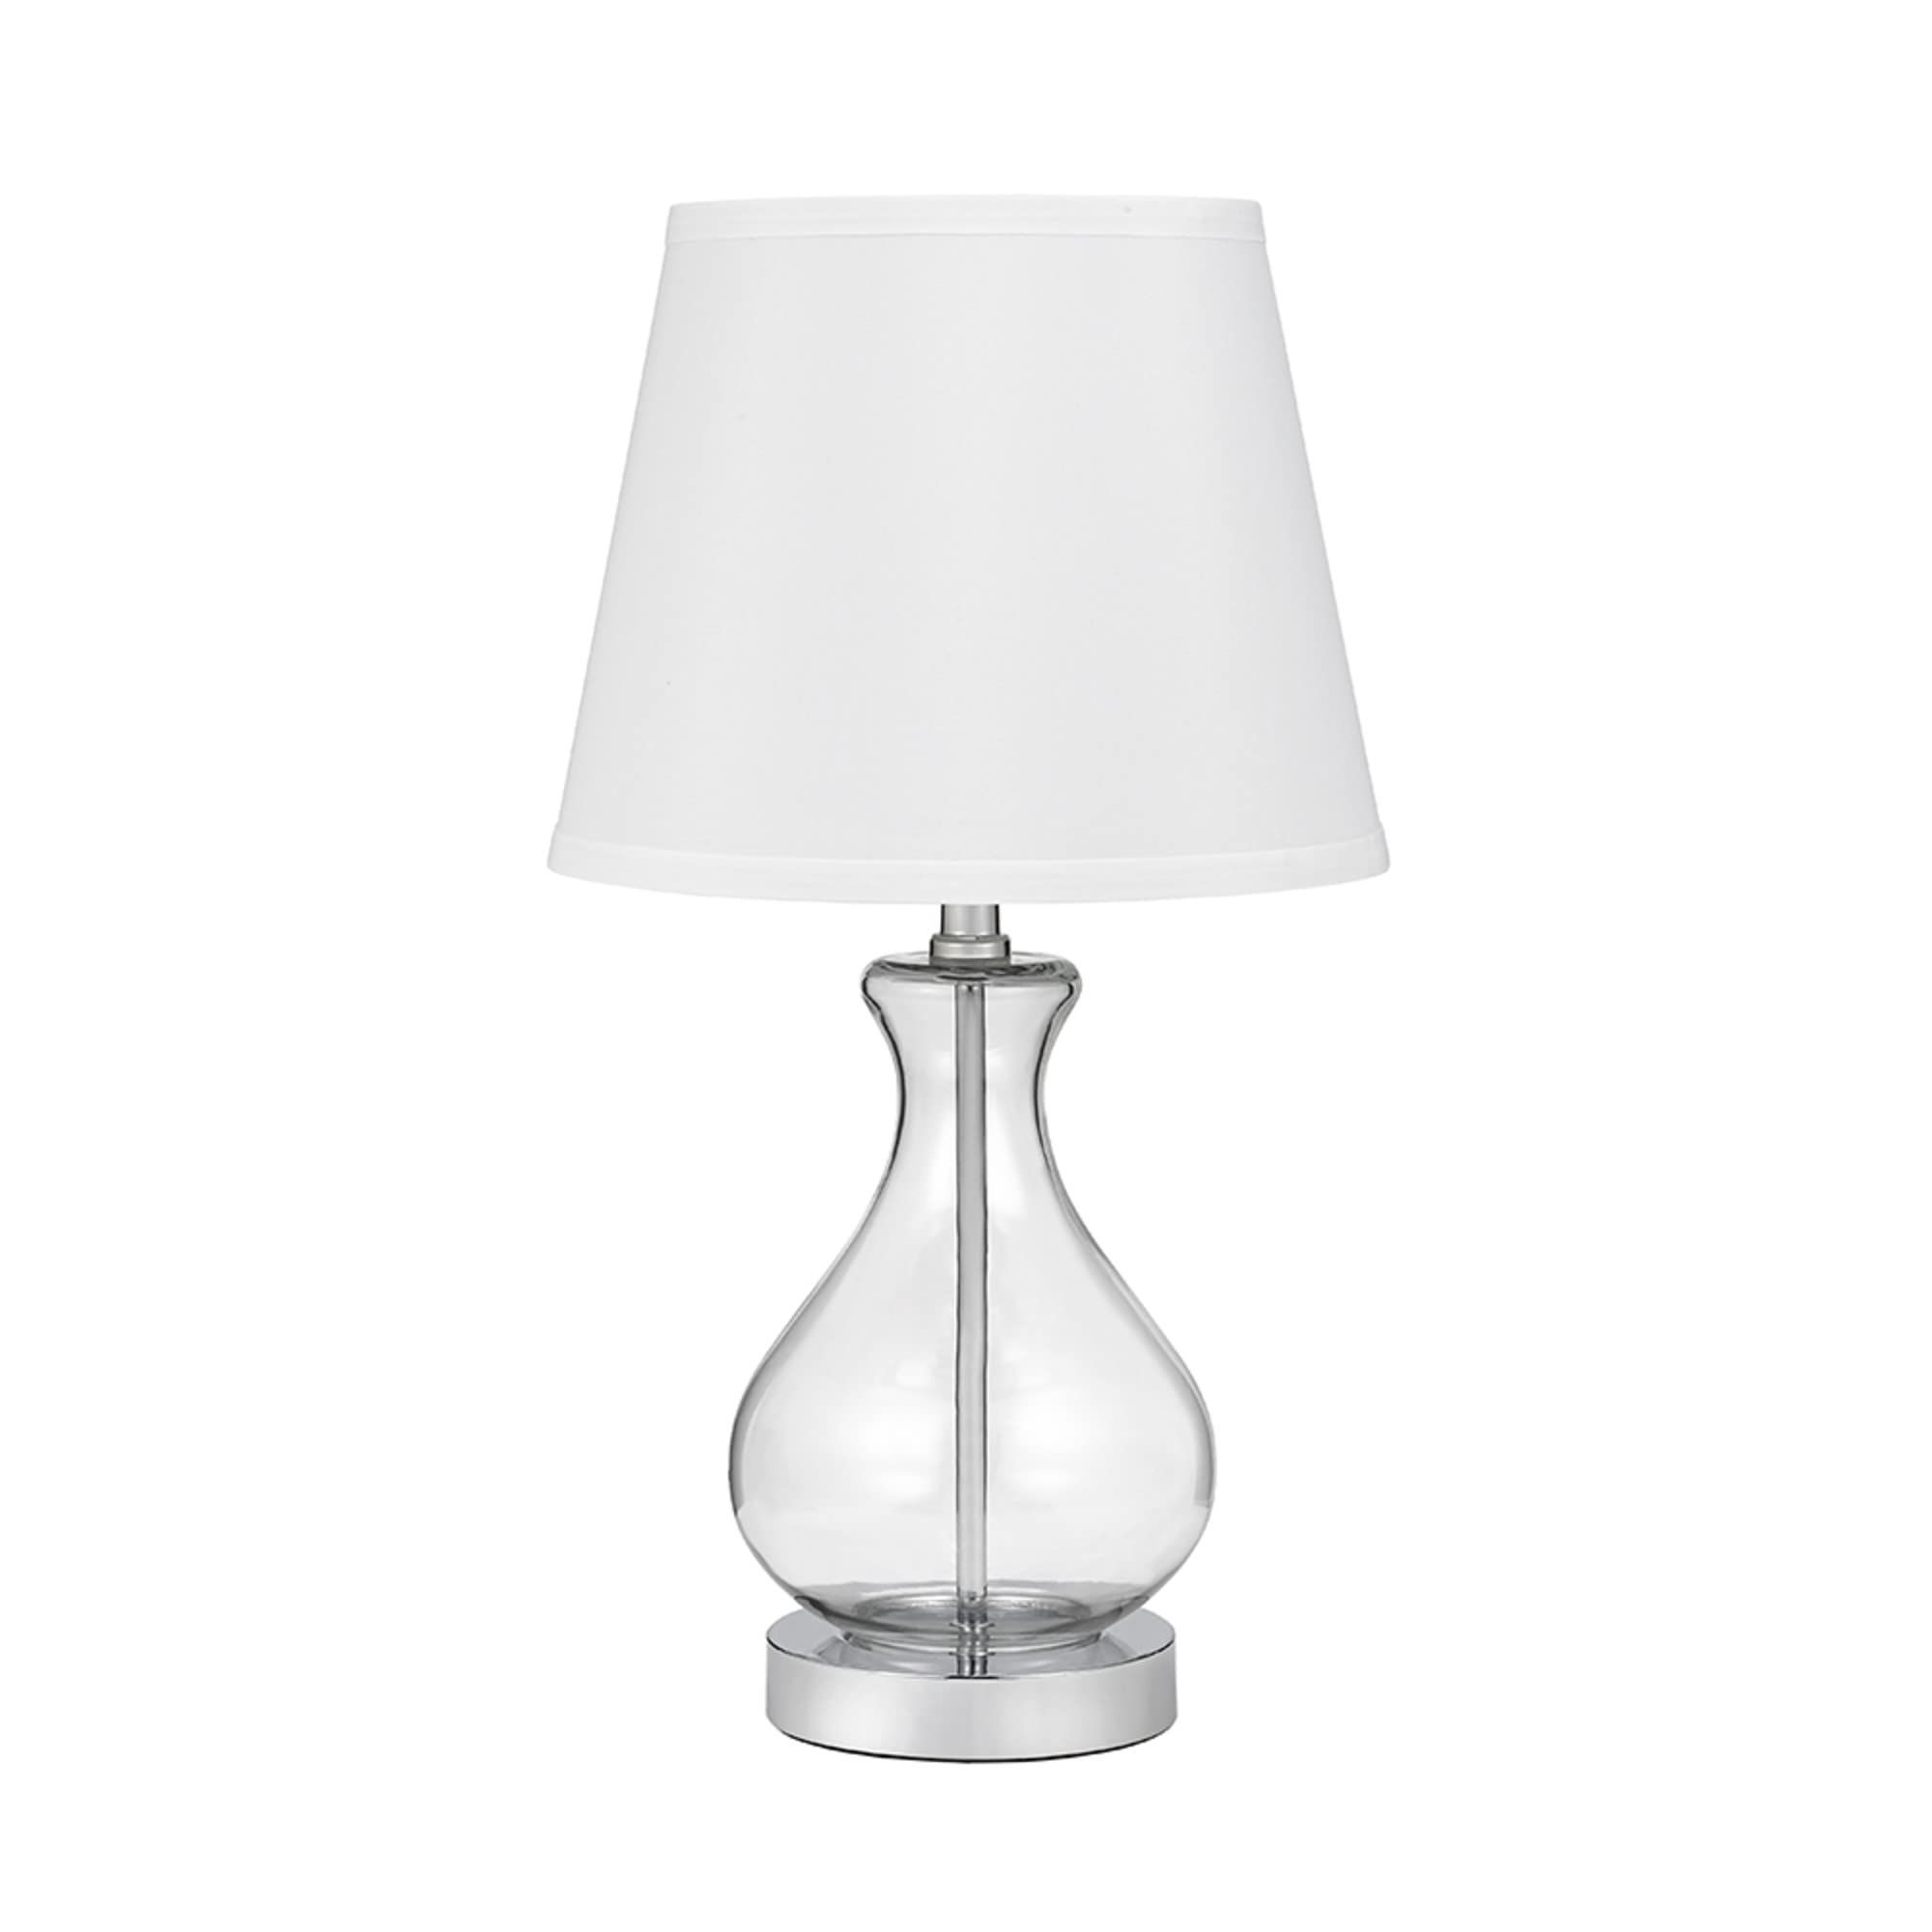 Well Known Clear Glass Standing Lamps Pertaining To Catalina 19896 001 Transitional Teardrop Clear Glass Table Lamp, 18, White (View 9 of 10)